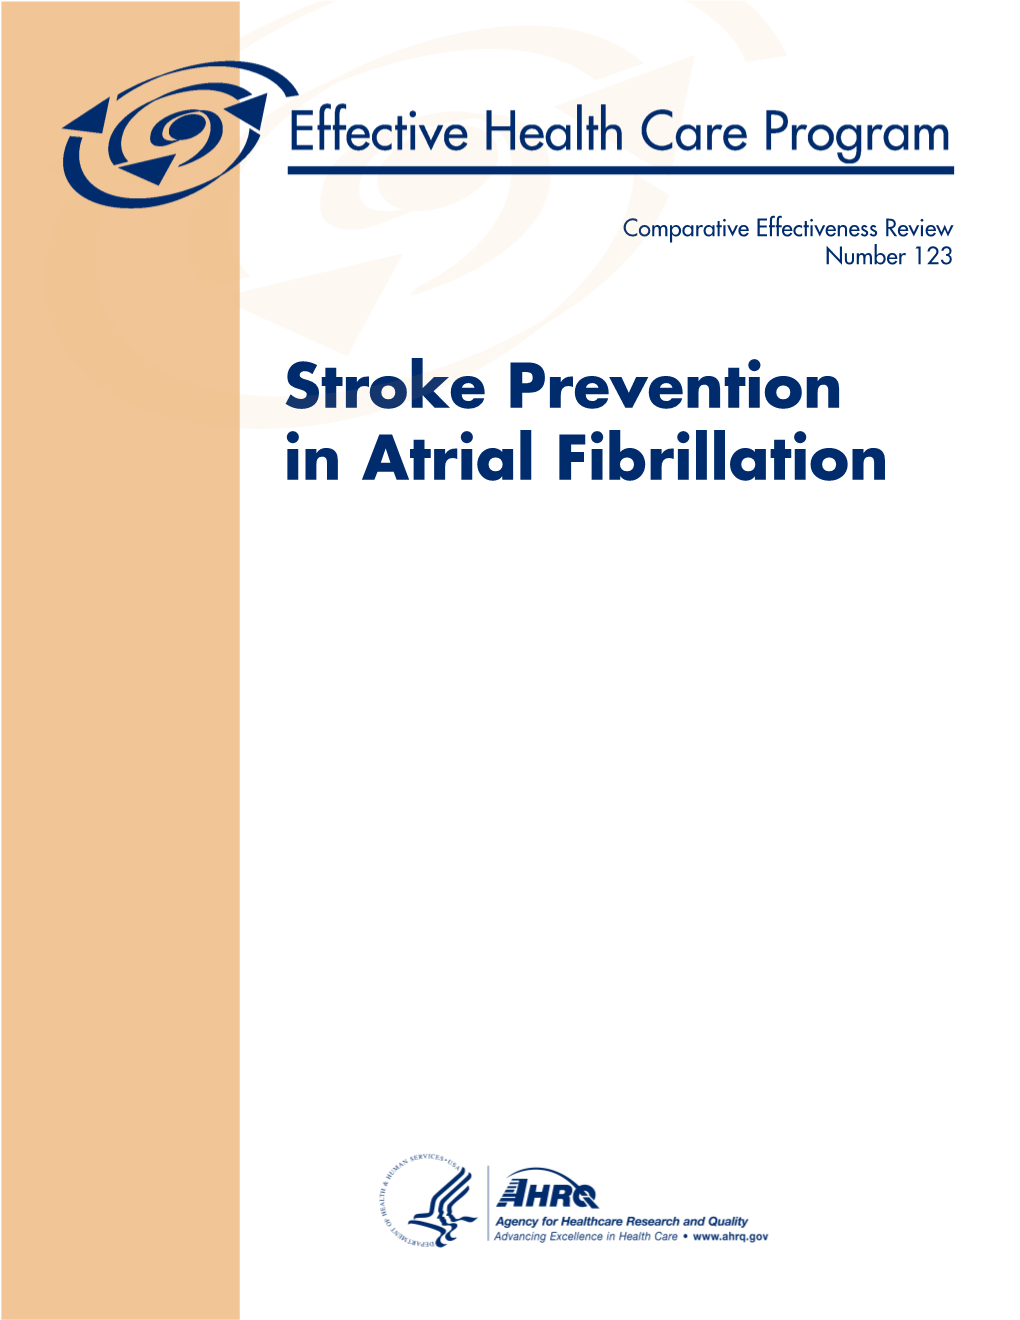 Stroke Prevention in Atrial Fibrillation Comparative Effectiveness Review Number 123